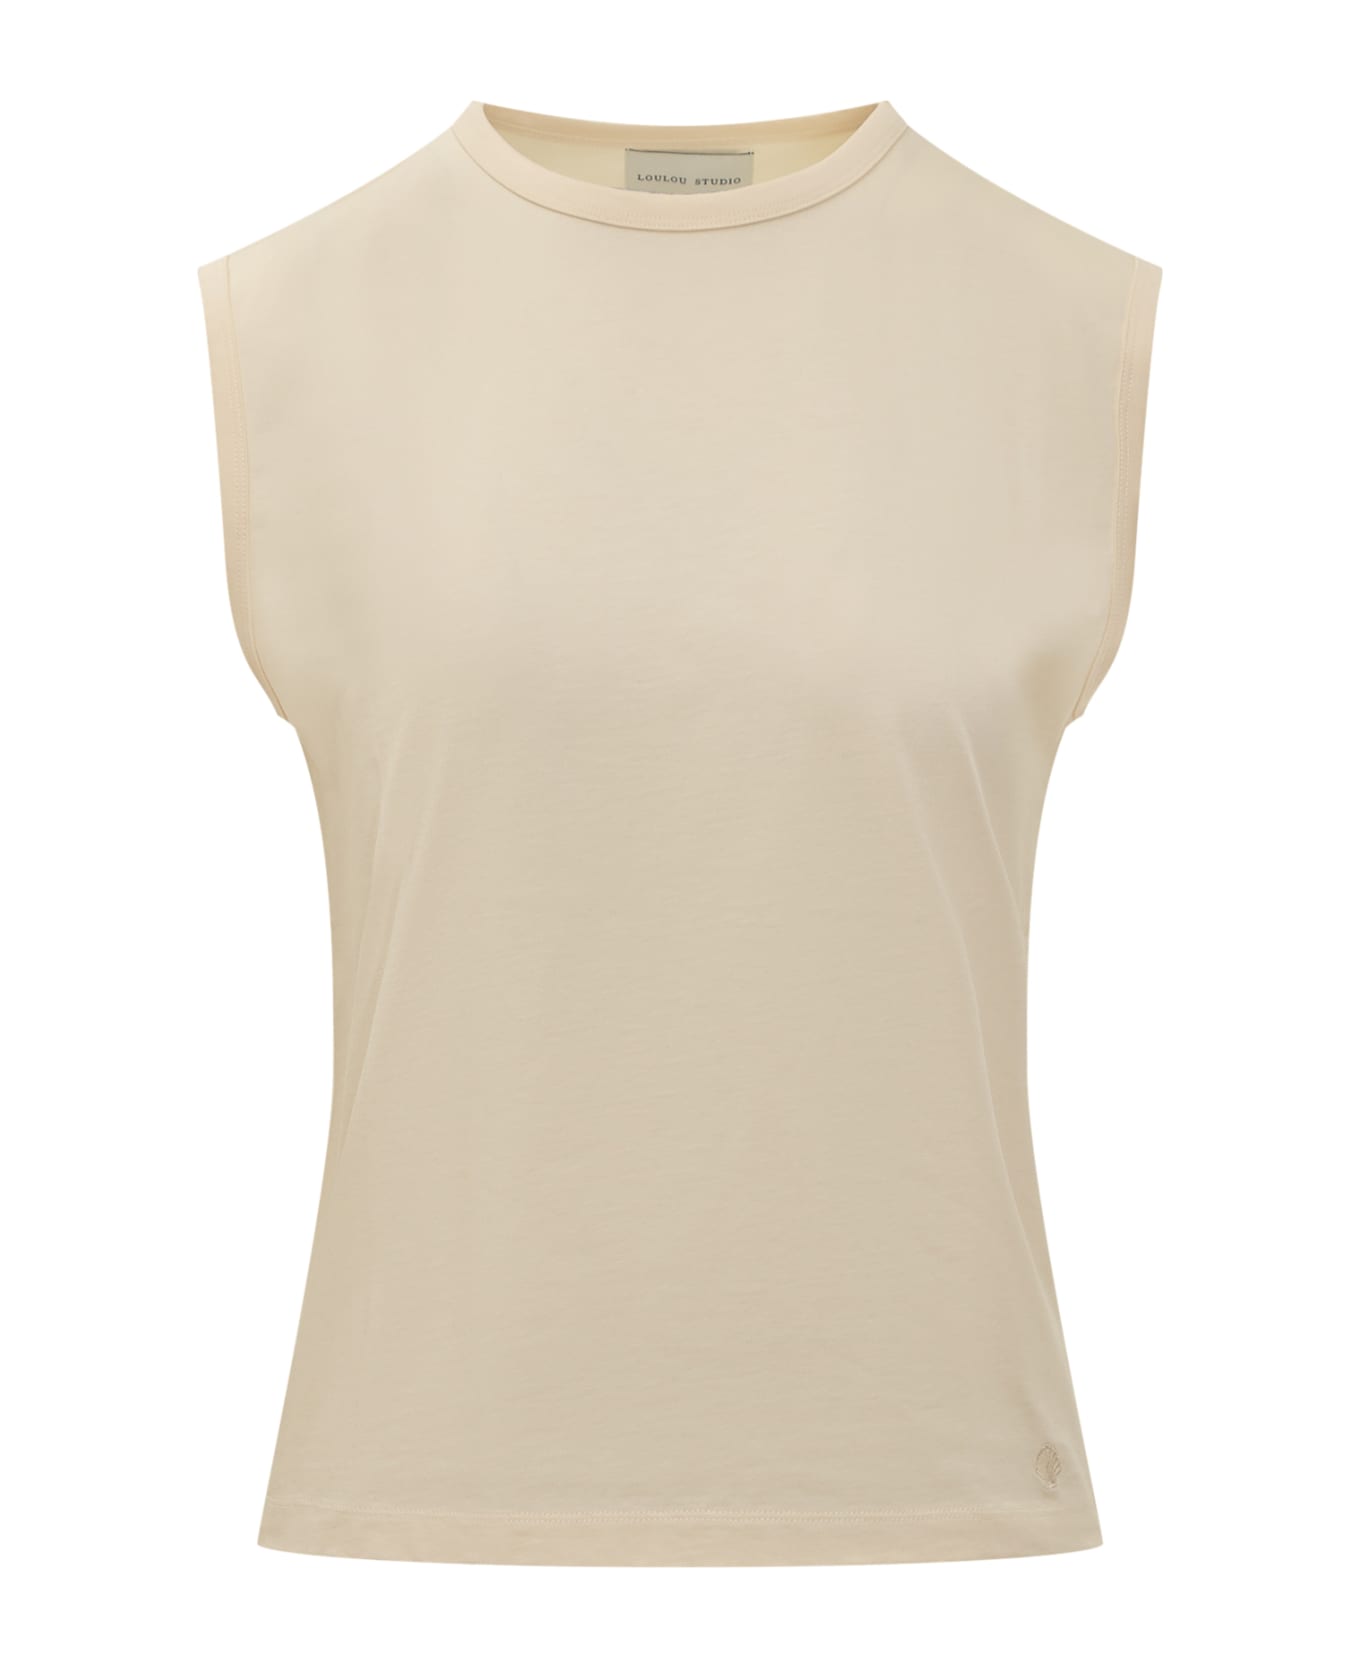 Loulou Studio Top - RICE IVORY